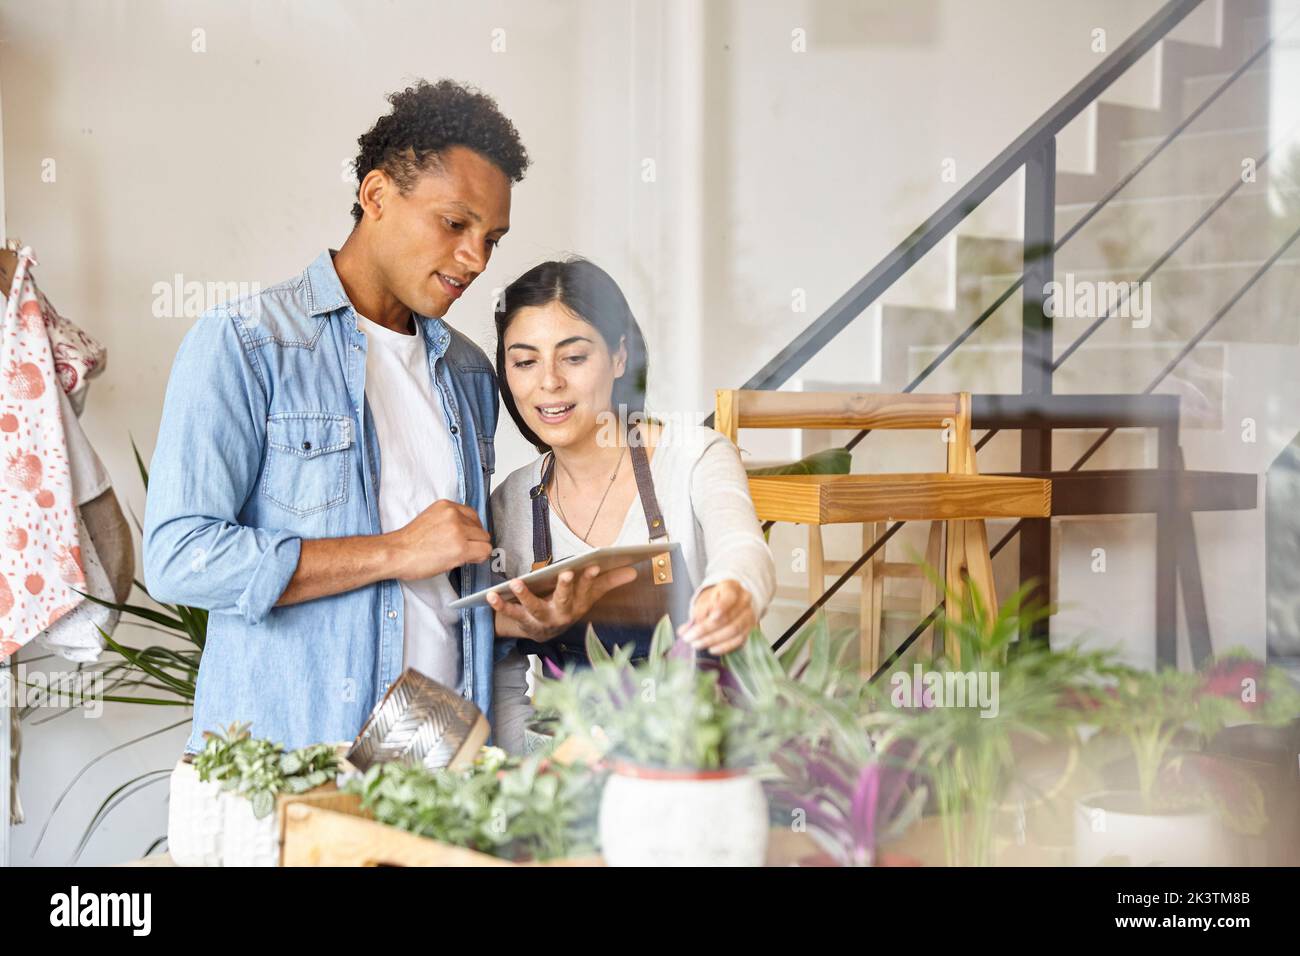 Coworkers using digital tablet at small business plant shop Stock Photo